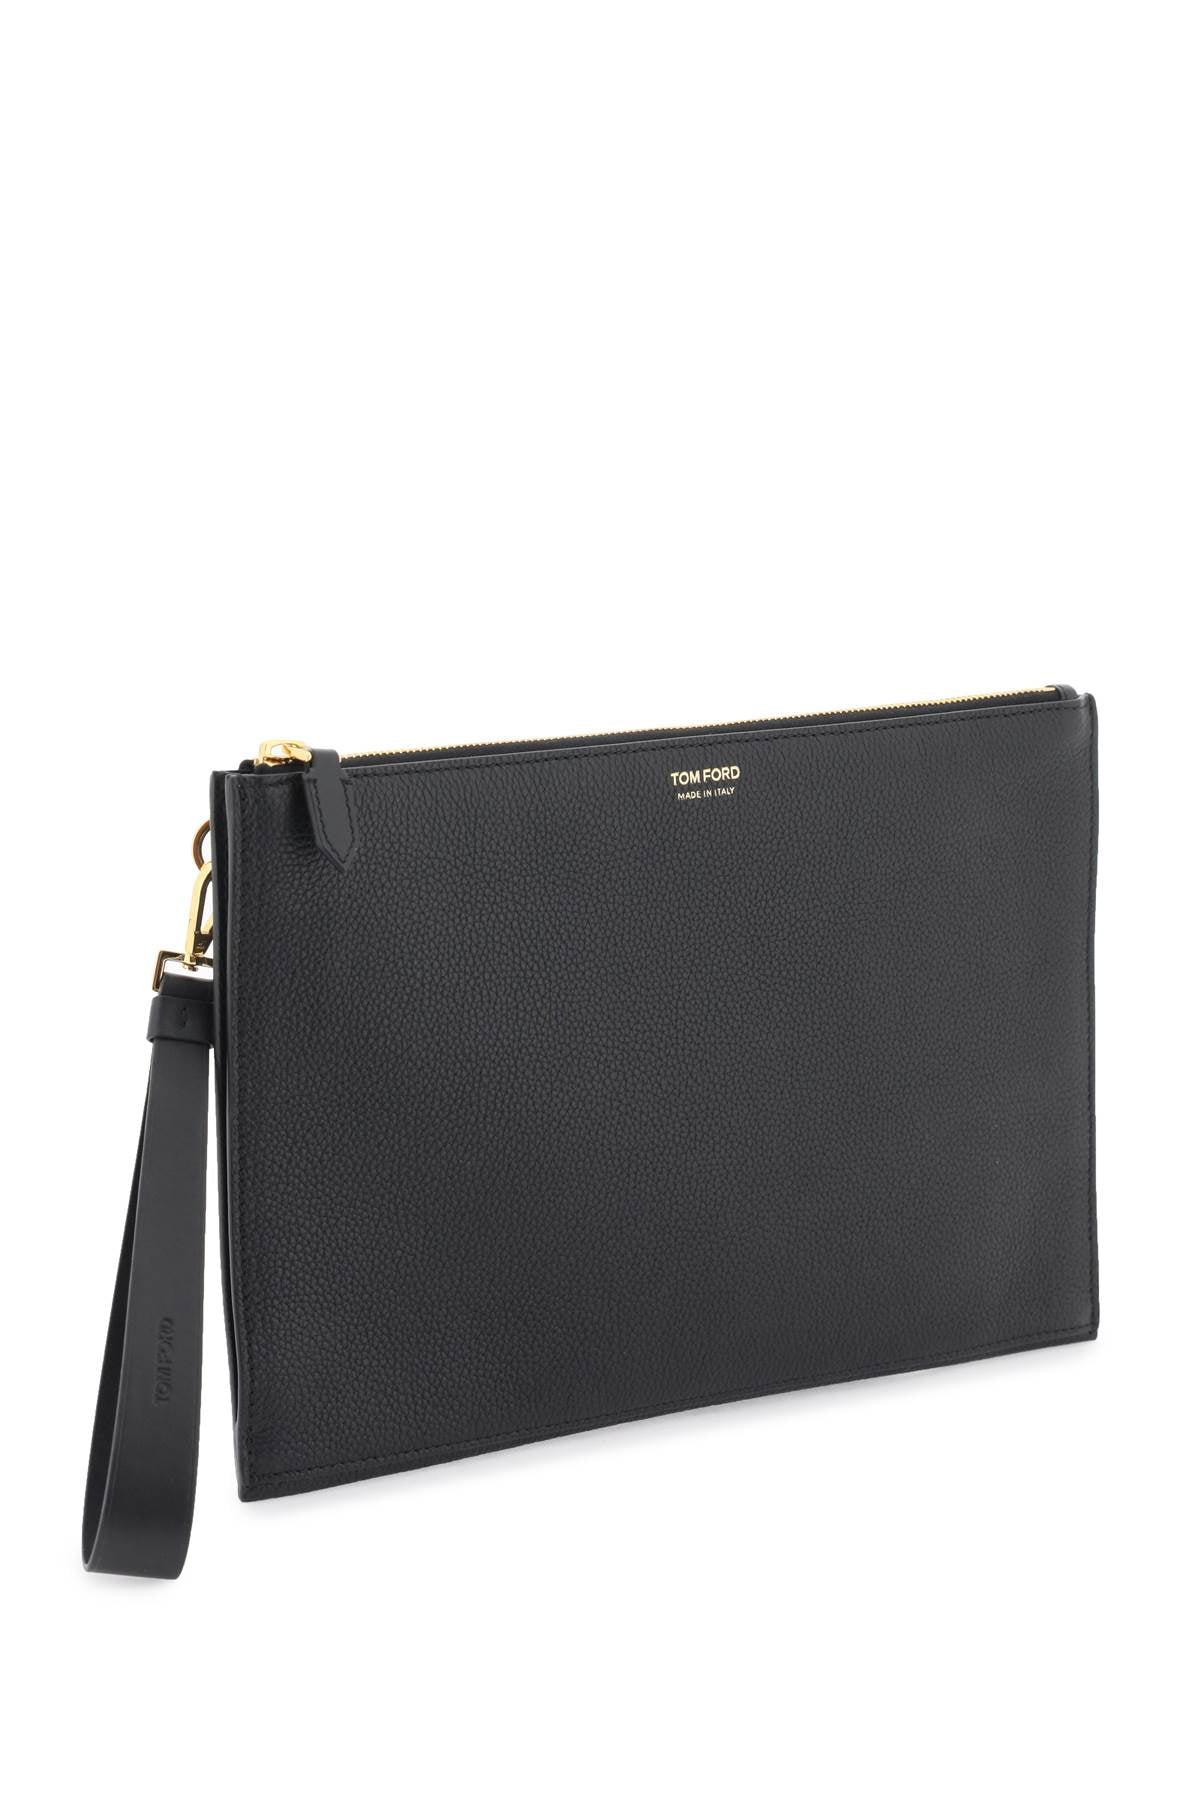 Tom ford grained leather pouch-2